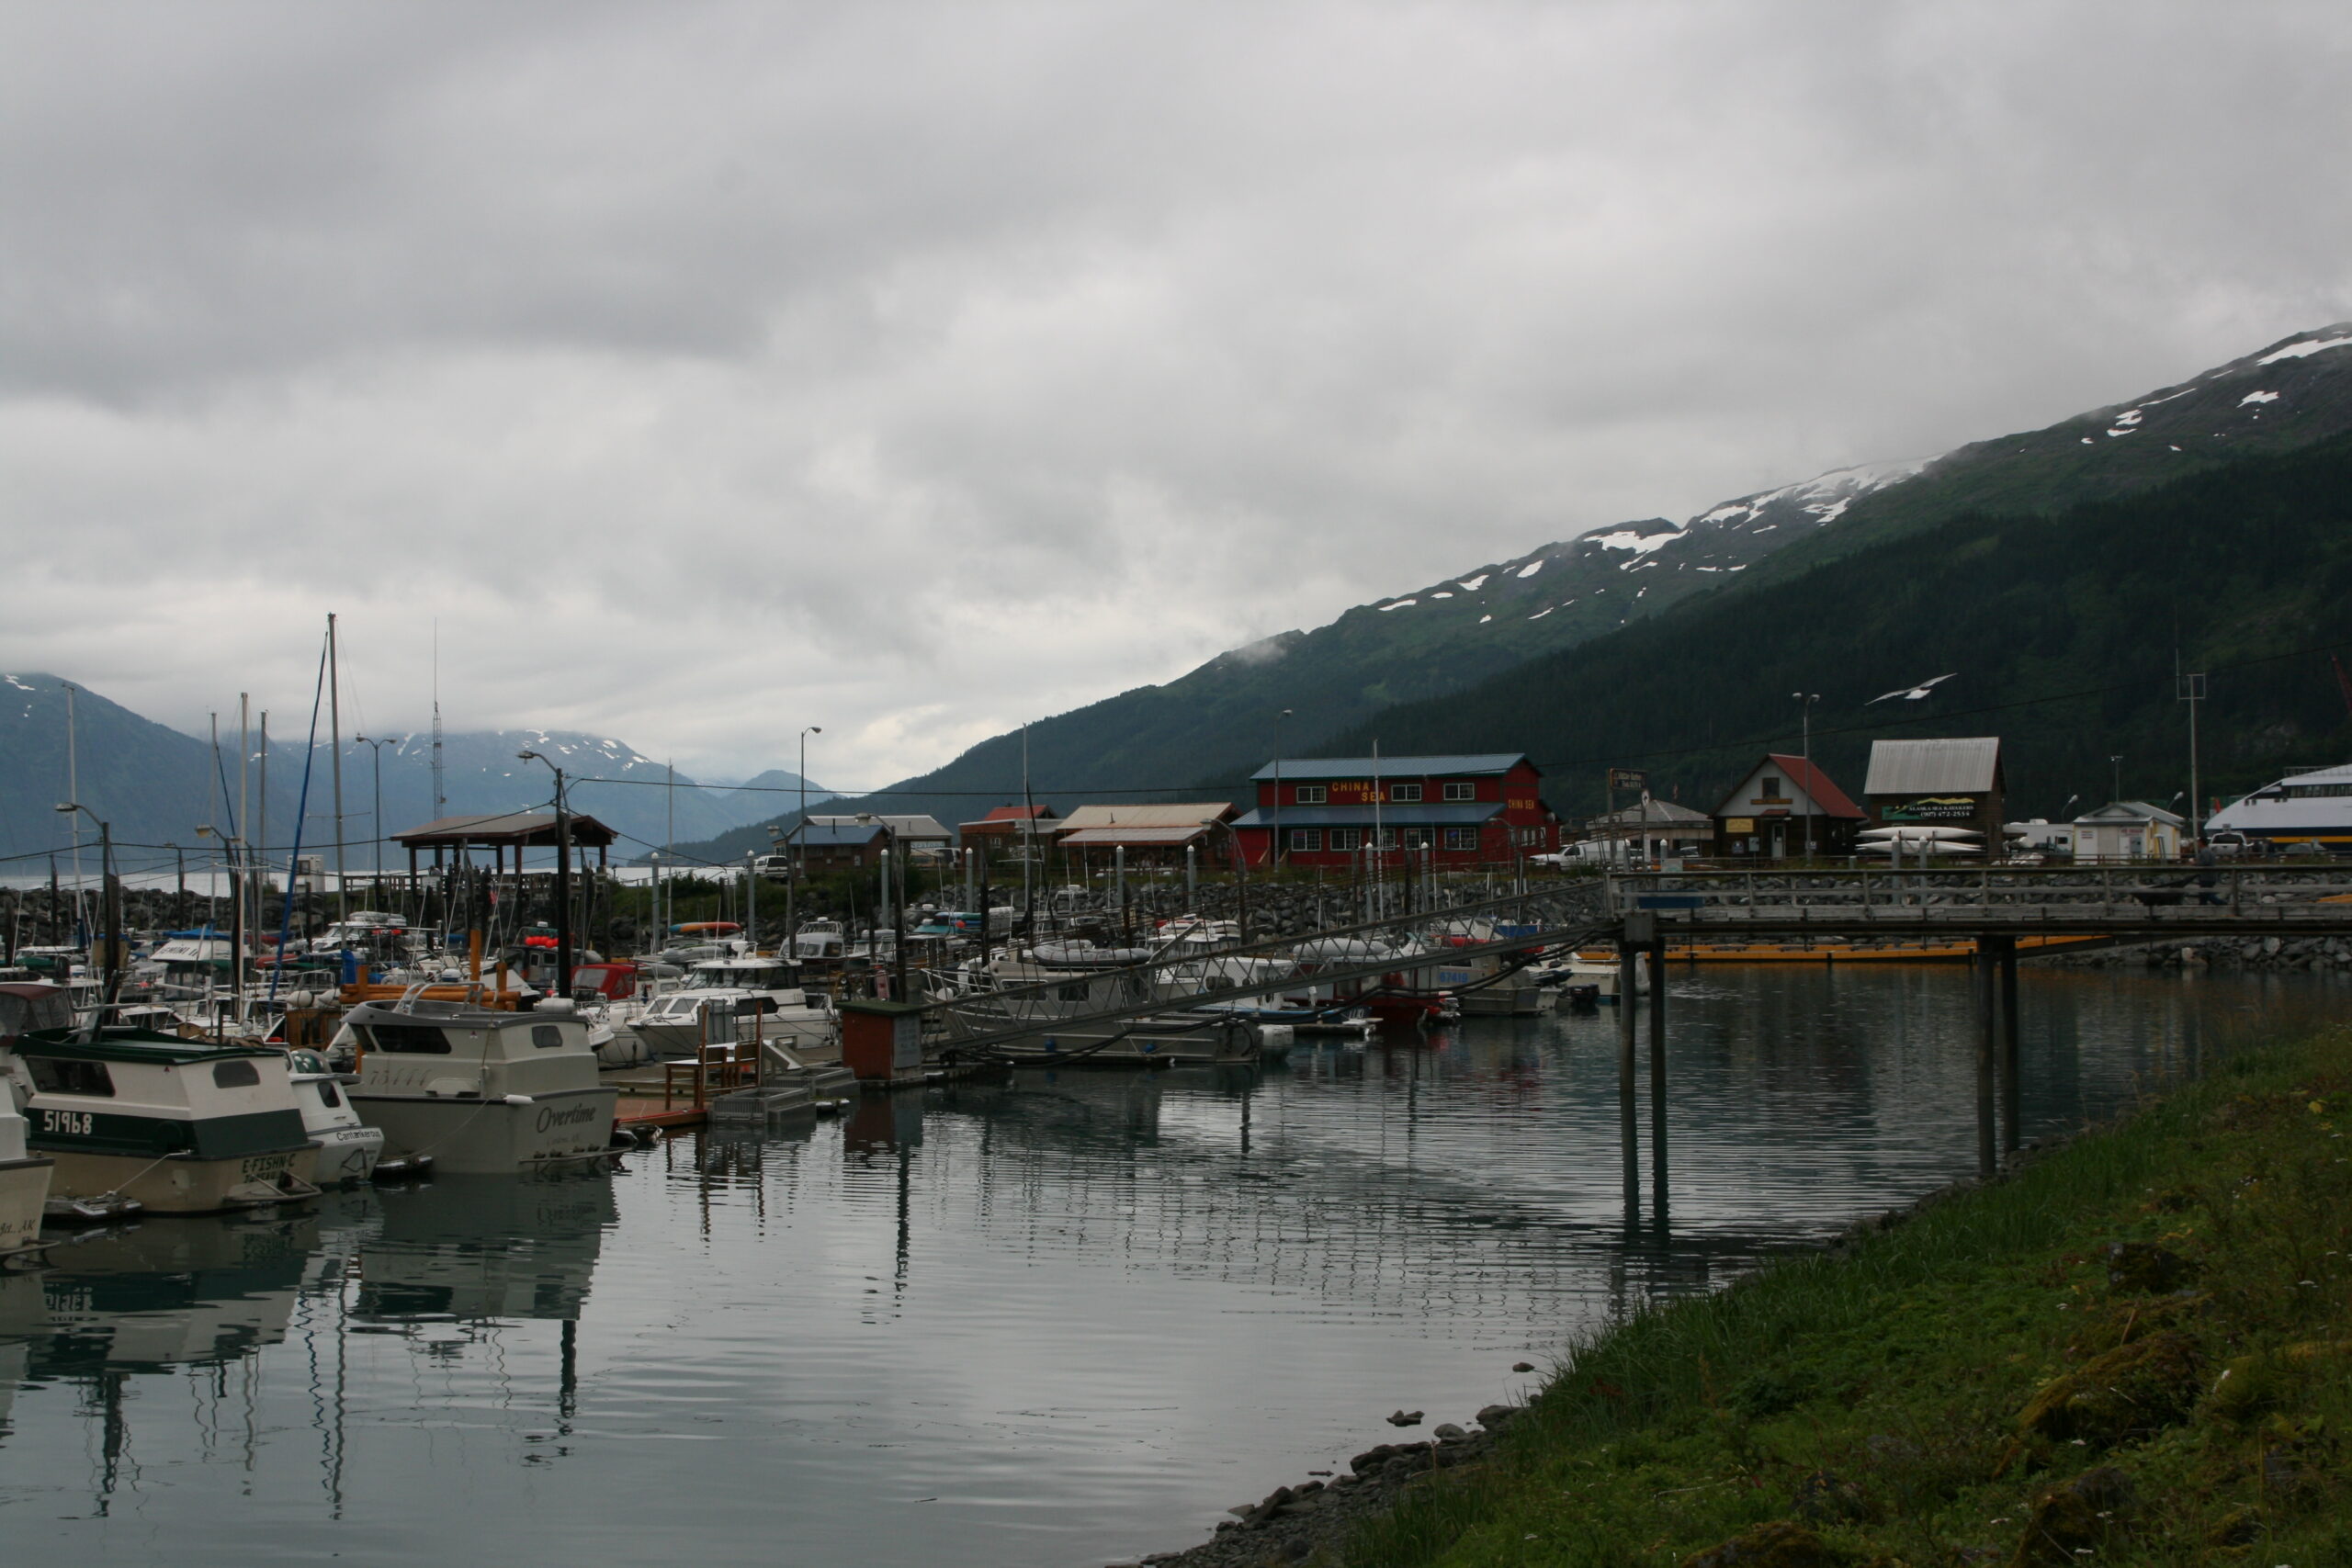 Boats sit in a harbor in Whittier, Alaska on the Prince William Sound.